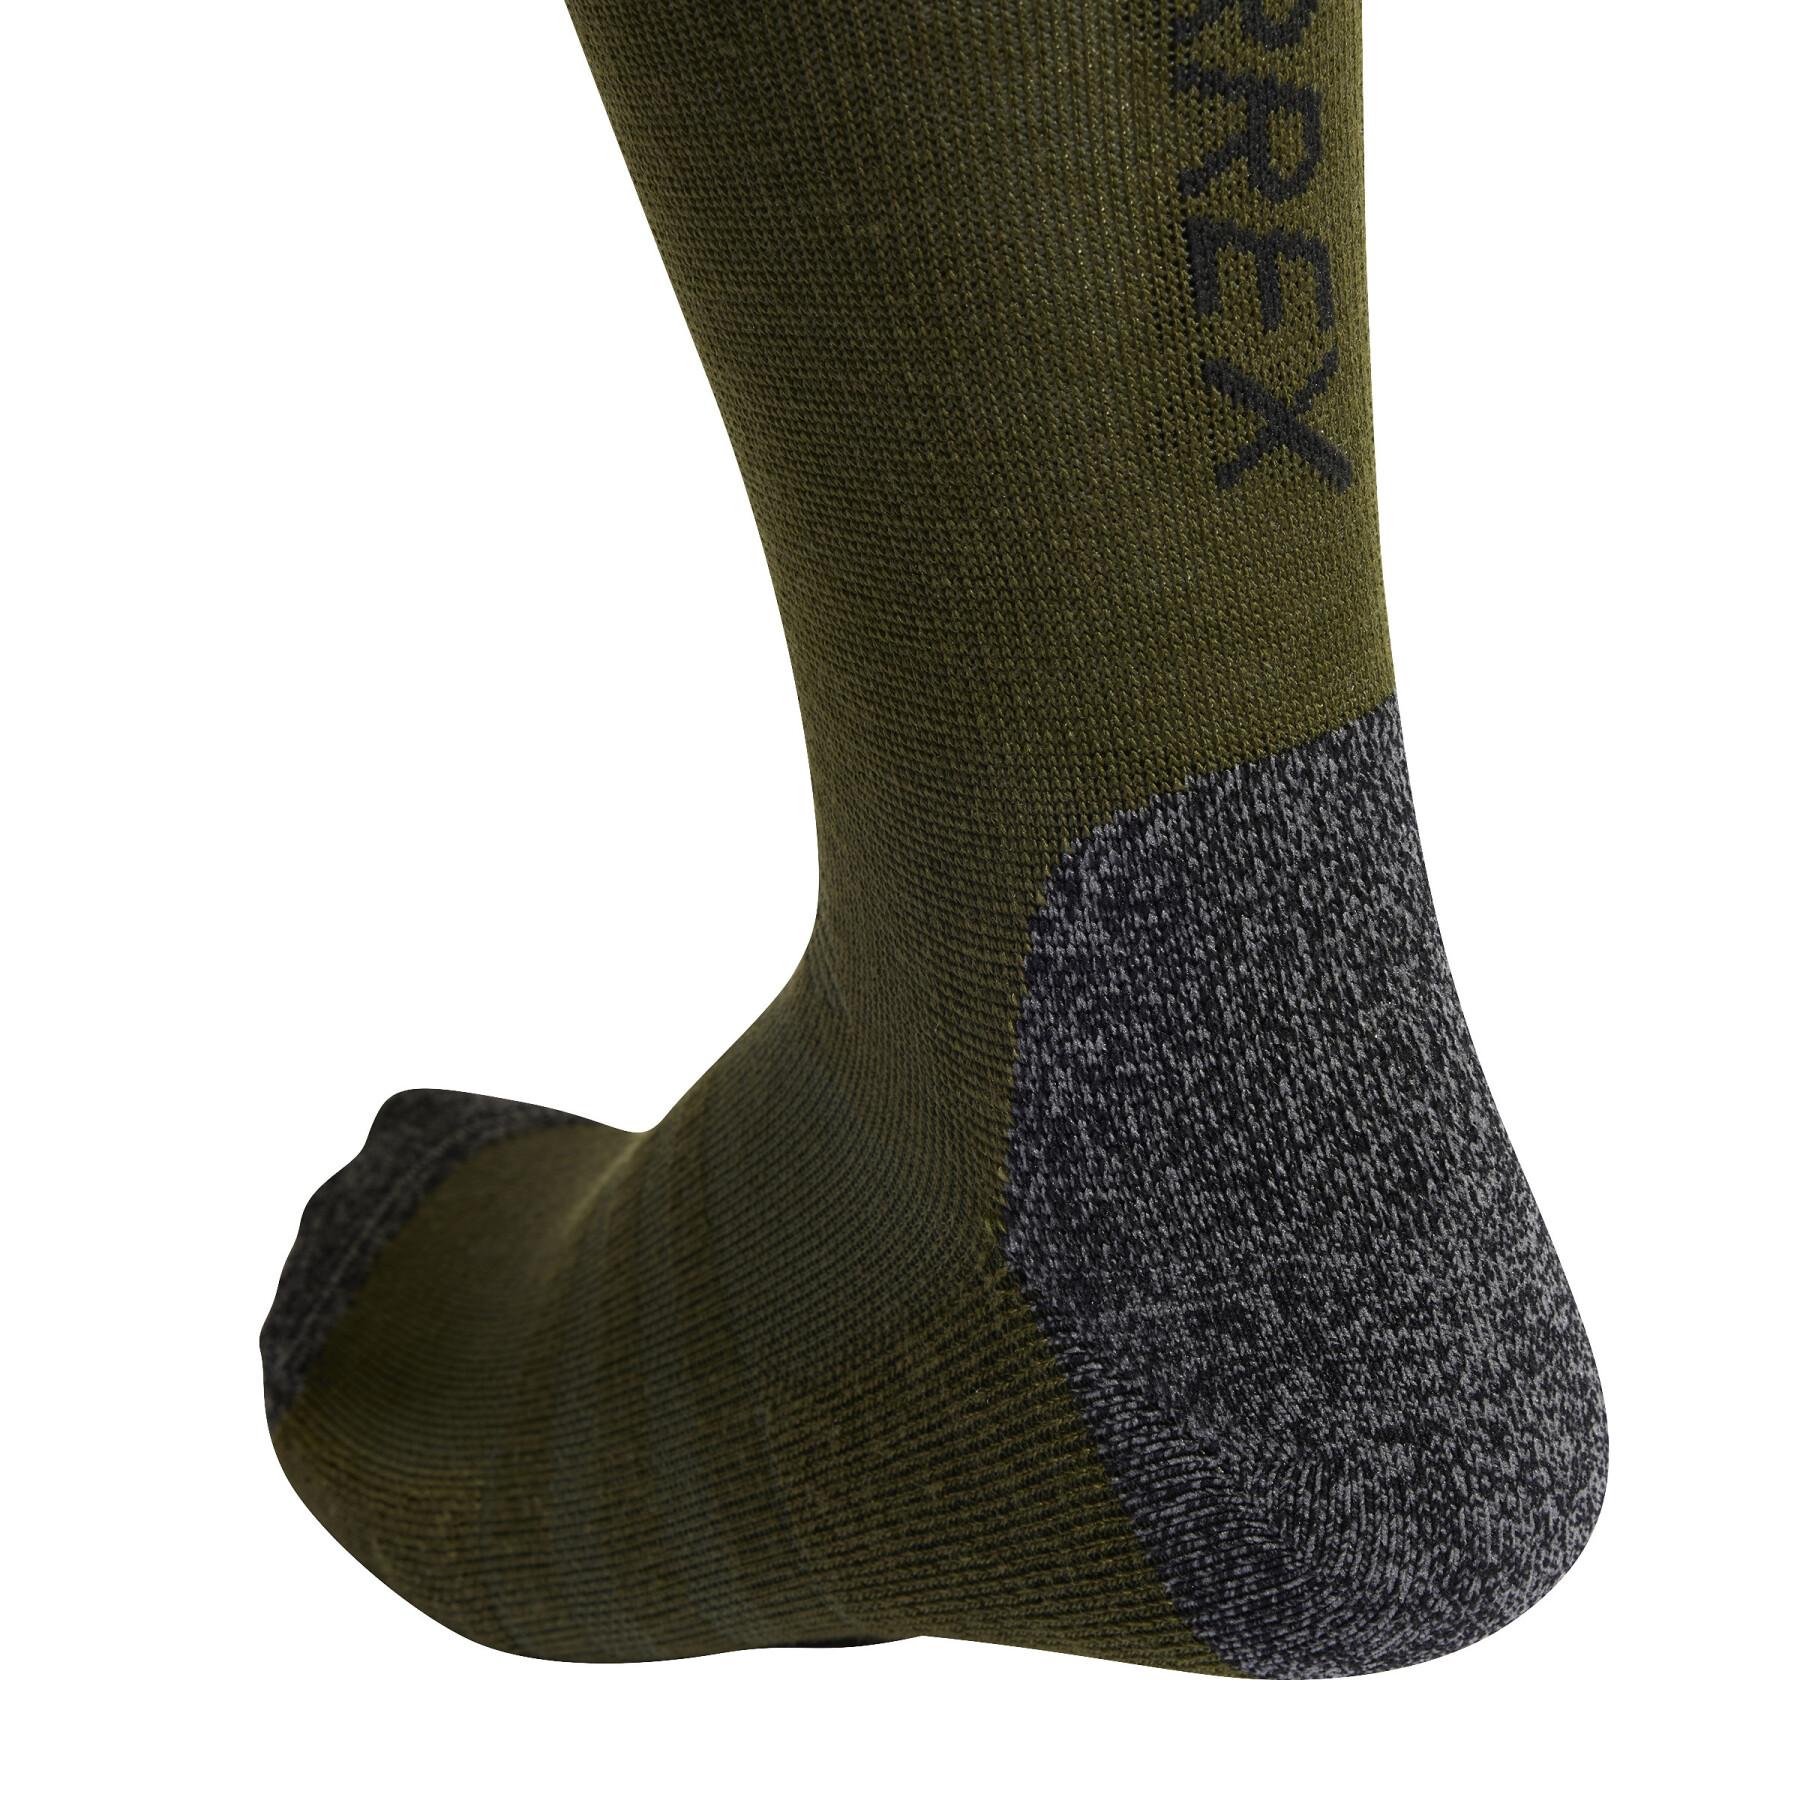 Chaussettes adidas Terrex Cold.Rdy Crew Wool